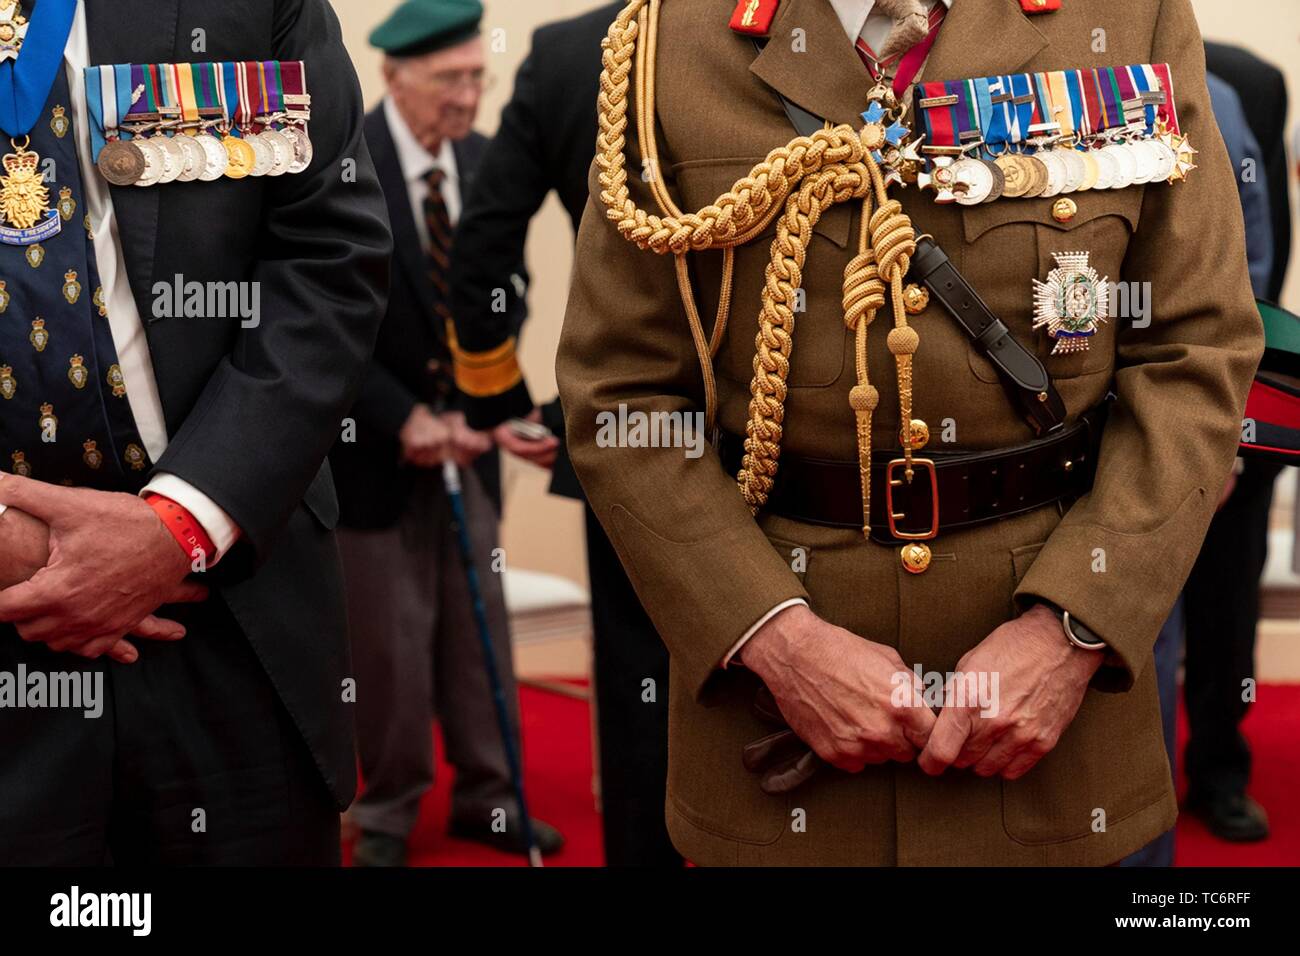 Portsmouth, UK. 05th June, 2019. Elderly World War Two veterans wearing their medals during an event to marking the 75th anniversary of D-Day at the Southsea Common June 5, 2019 in Portsmouth, England. World leaders gathered on the south coast of England where troops departed for the D-Day assault 75-years-ago. Credit: Planetpix/Alamy Live News Stock Photo